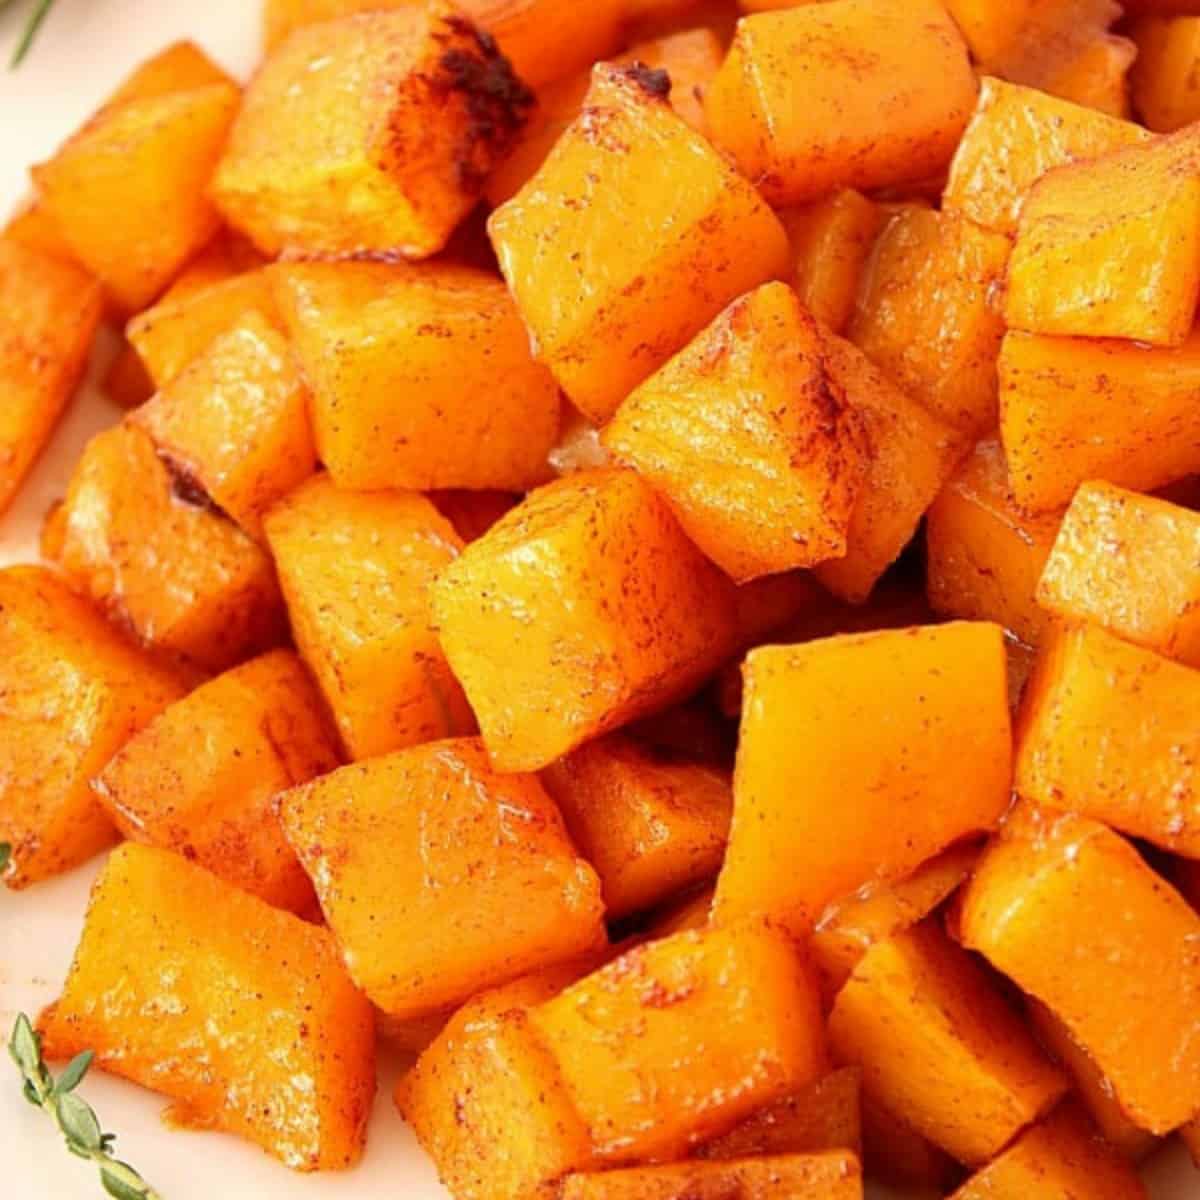 Cubes or roasted squash on a plate.